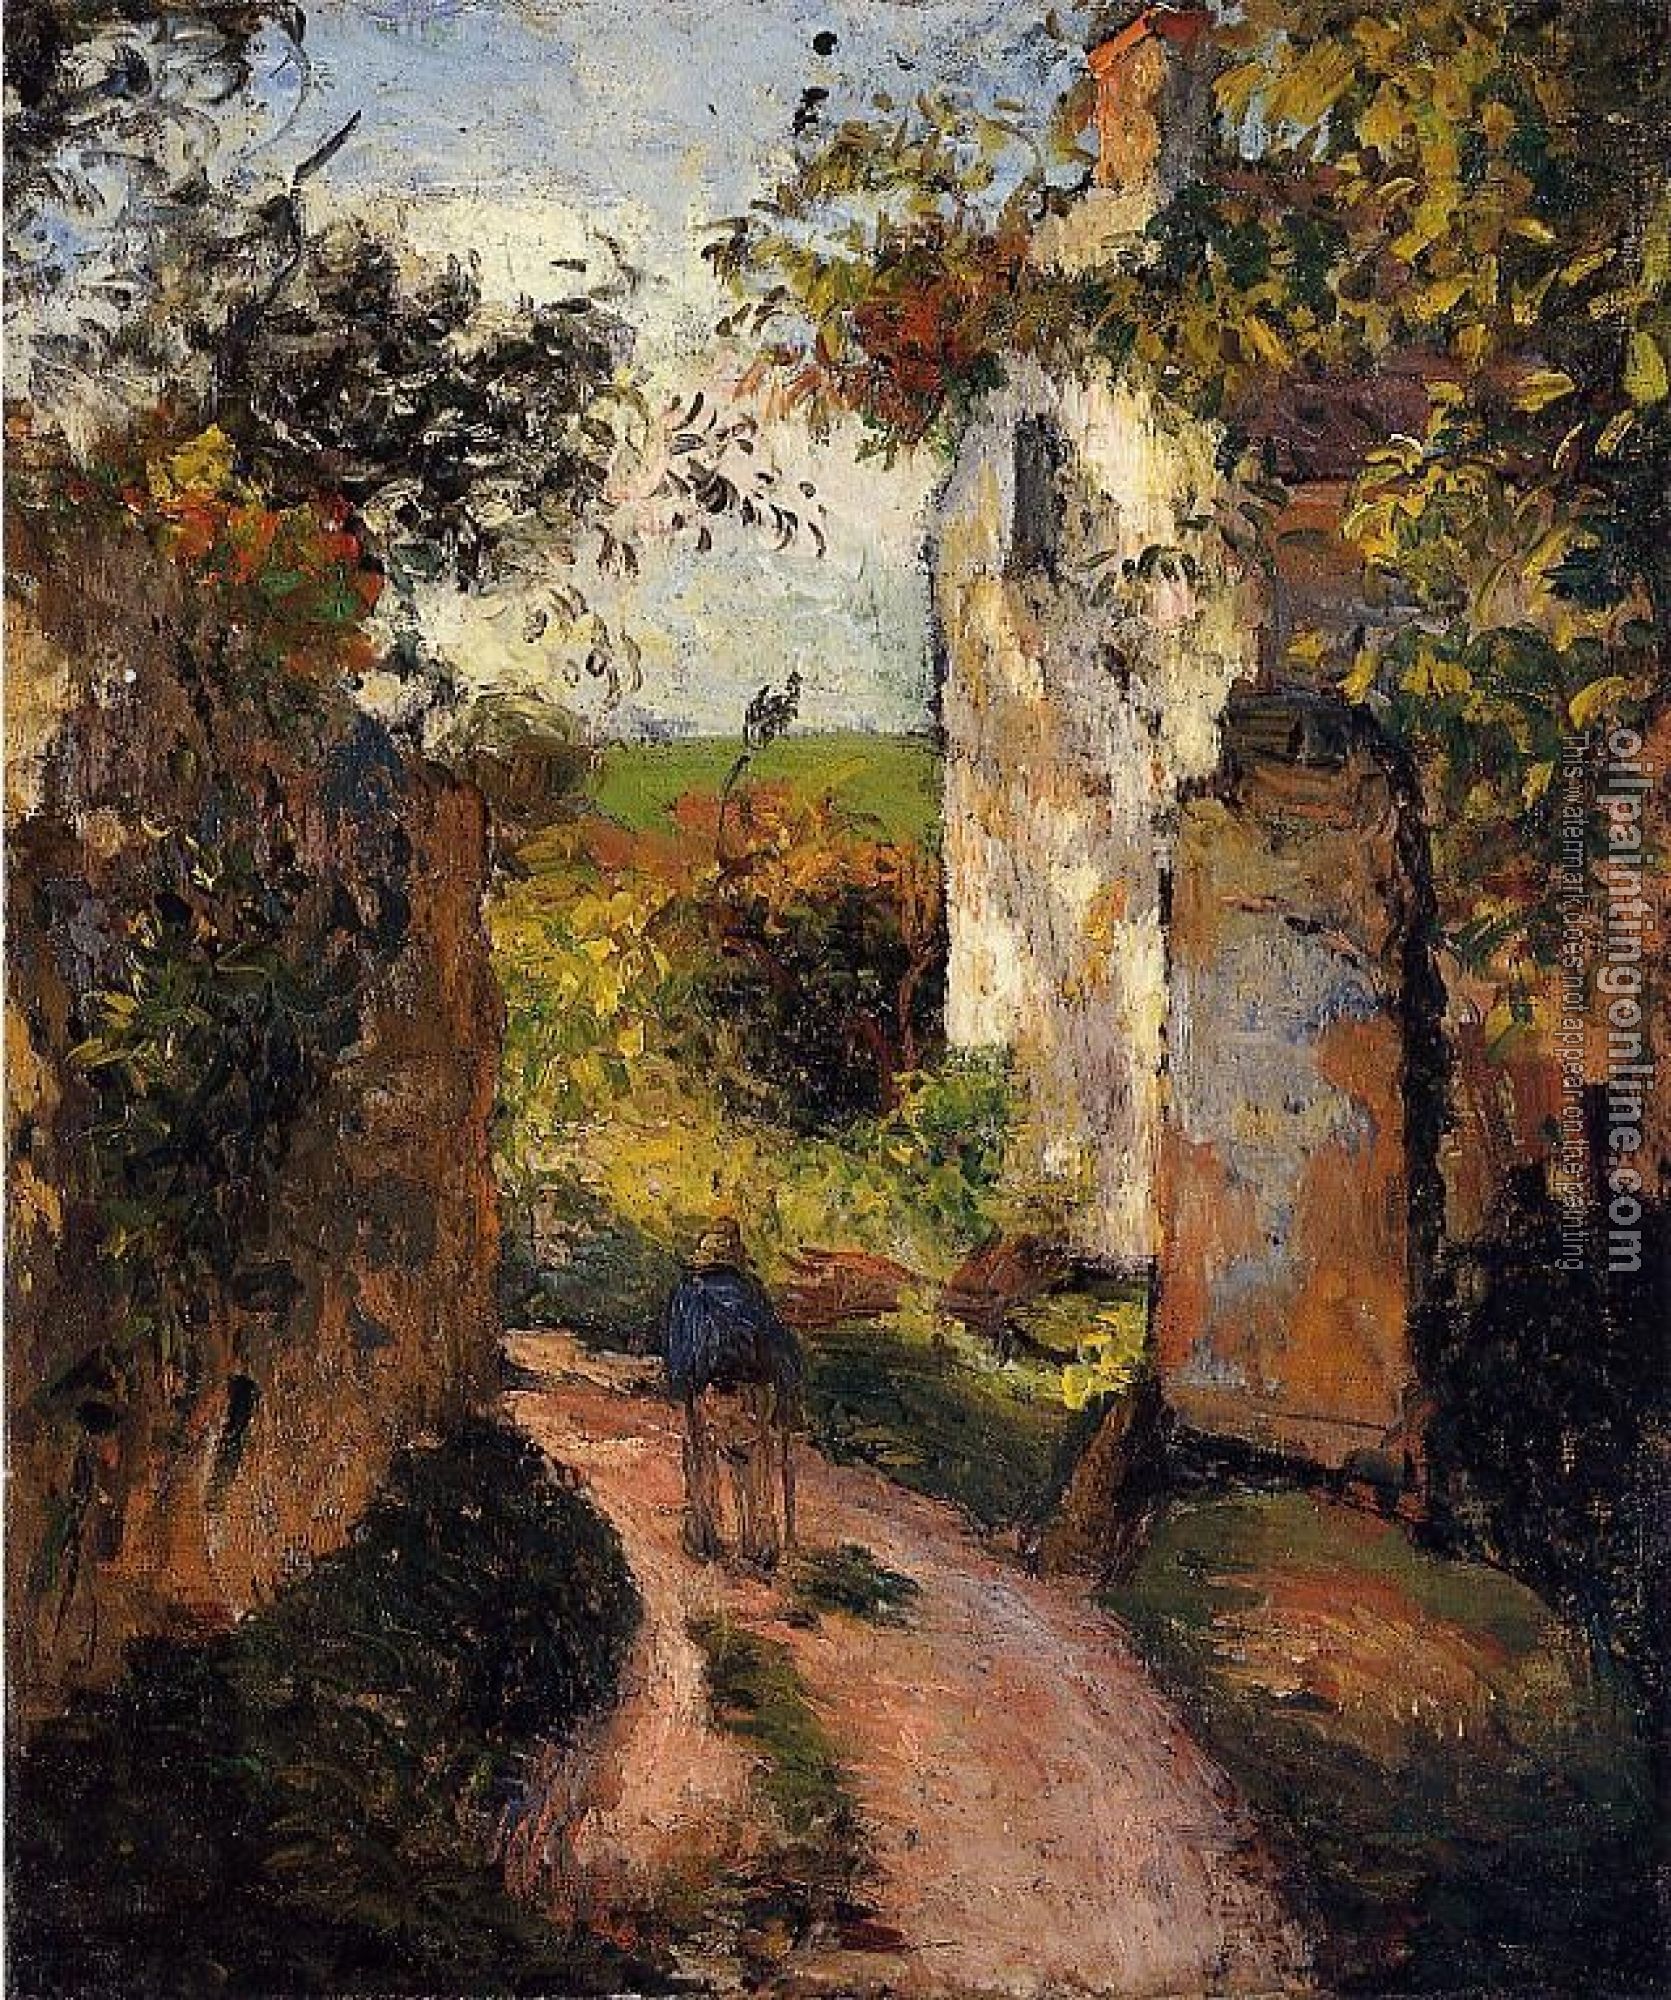 Pissarro, Camille - A Peasant in the Lane at l'Hermitage, Pontoise